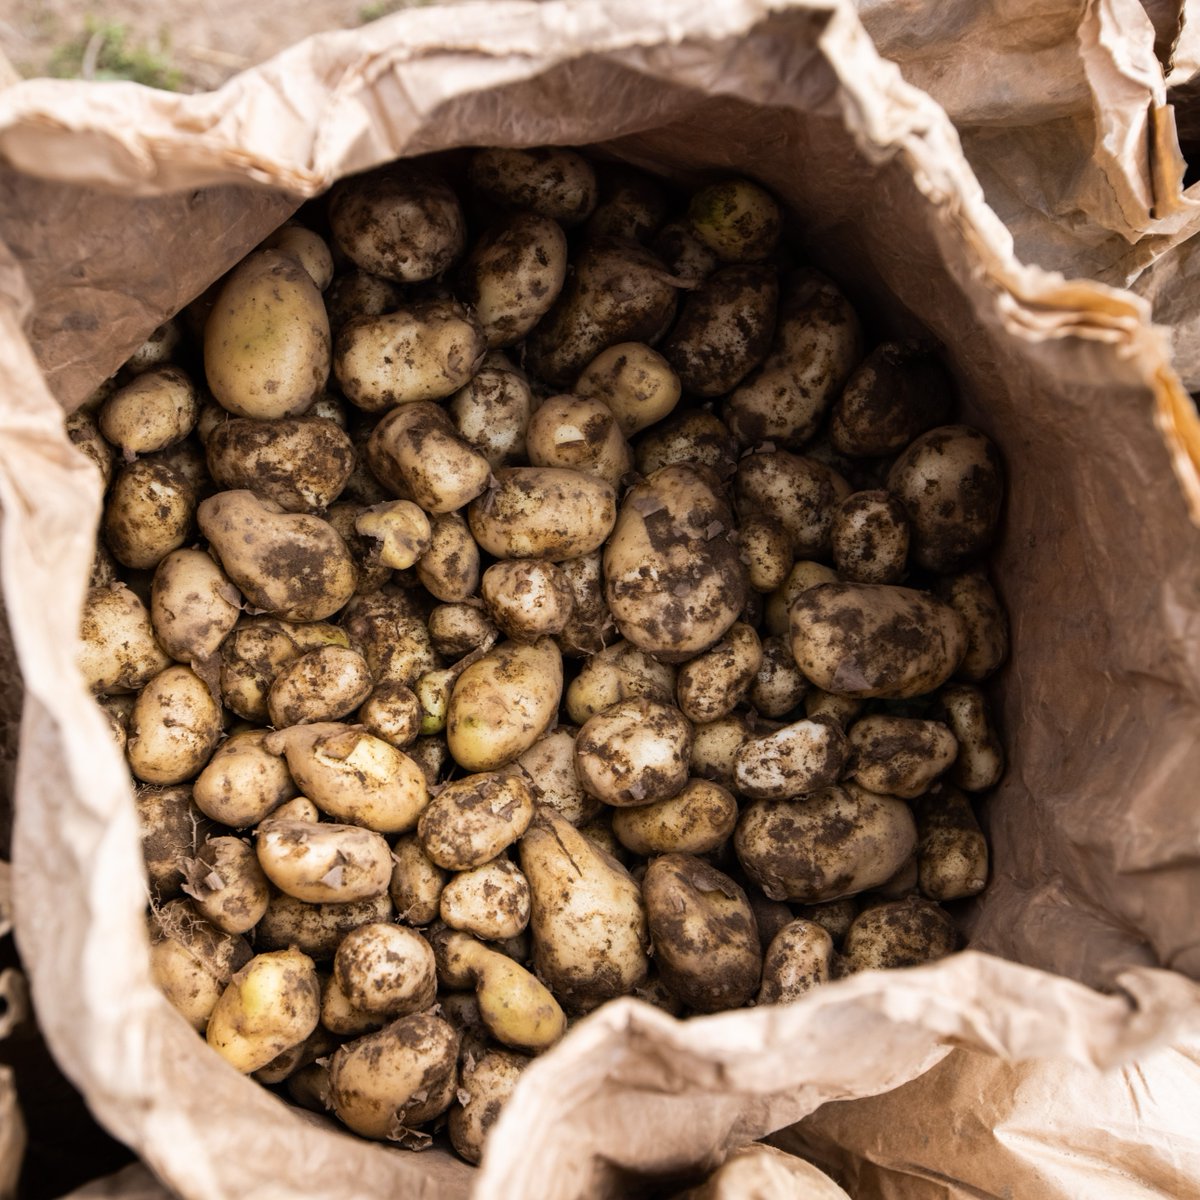 The season is slowly drawing to a close so make sure you get your hands on some #JerseyRoyals while you can!

#SeasonalProduce #SimplySeaonal #SpringRecipes